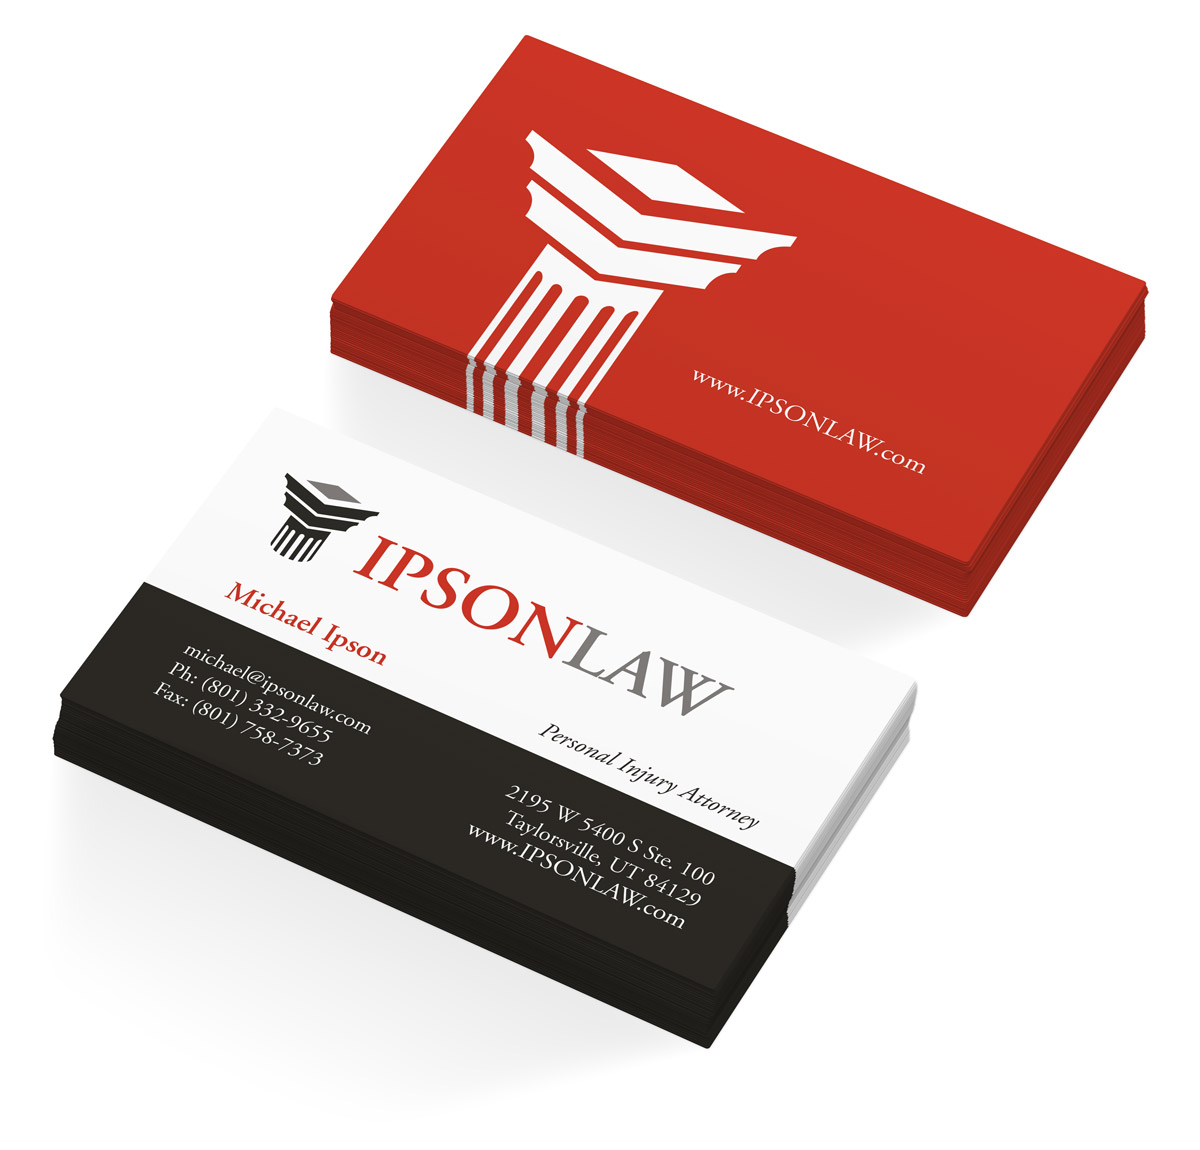 lawyer business card design